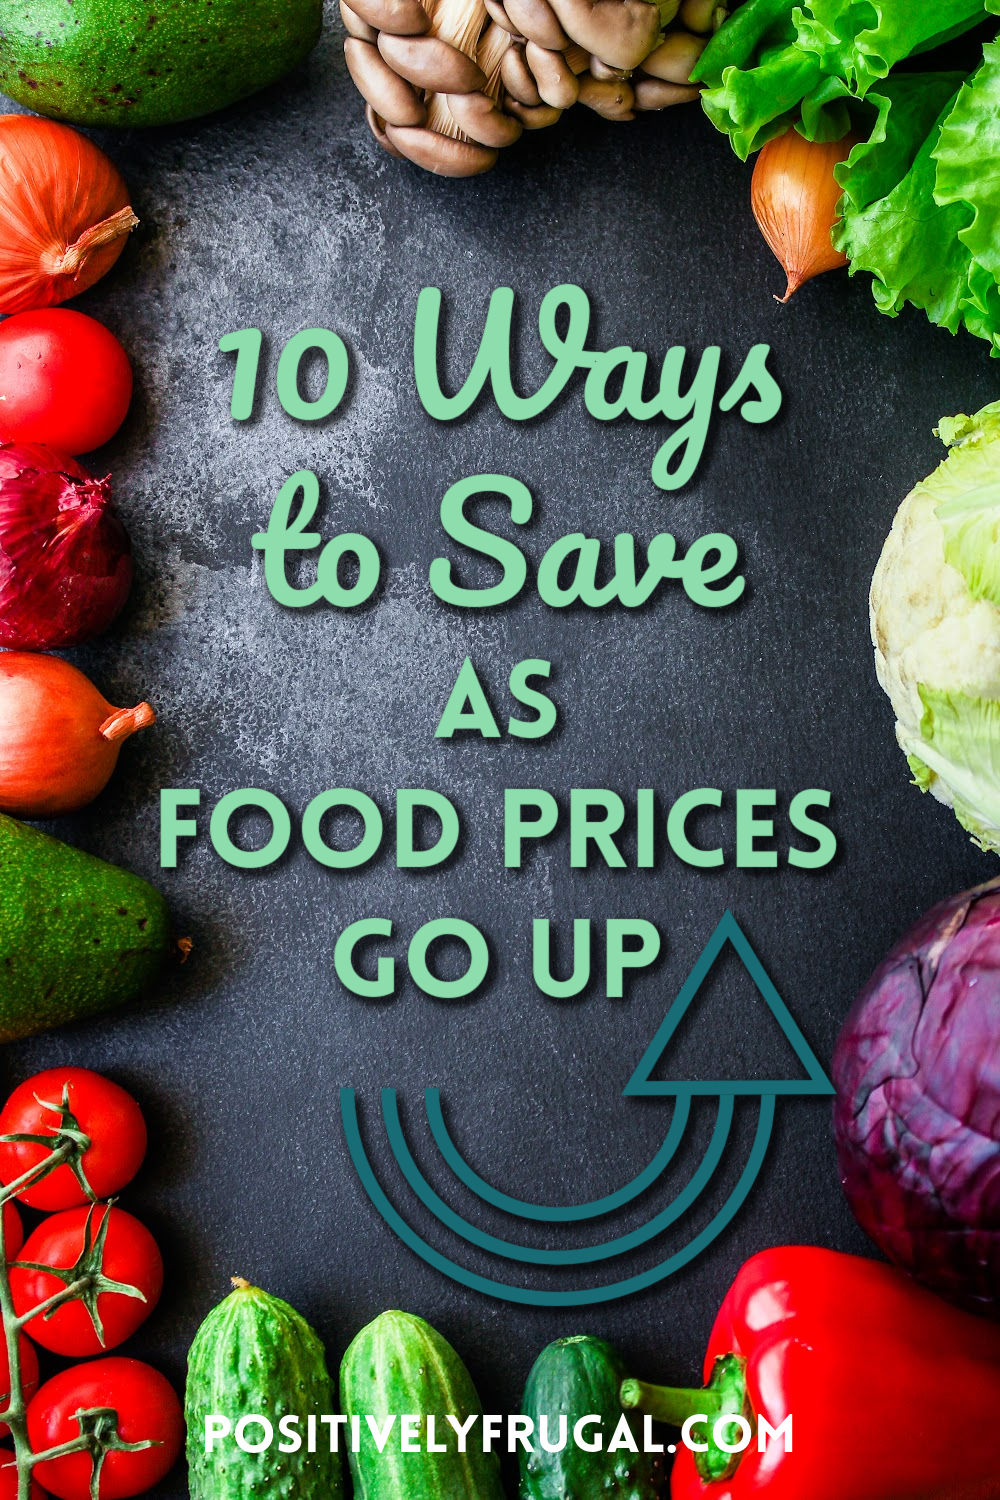 10 Ways to Save as Food Prices Go Up by PositivelyFrugal.com